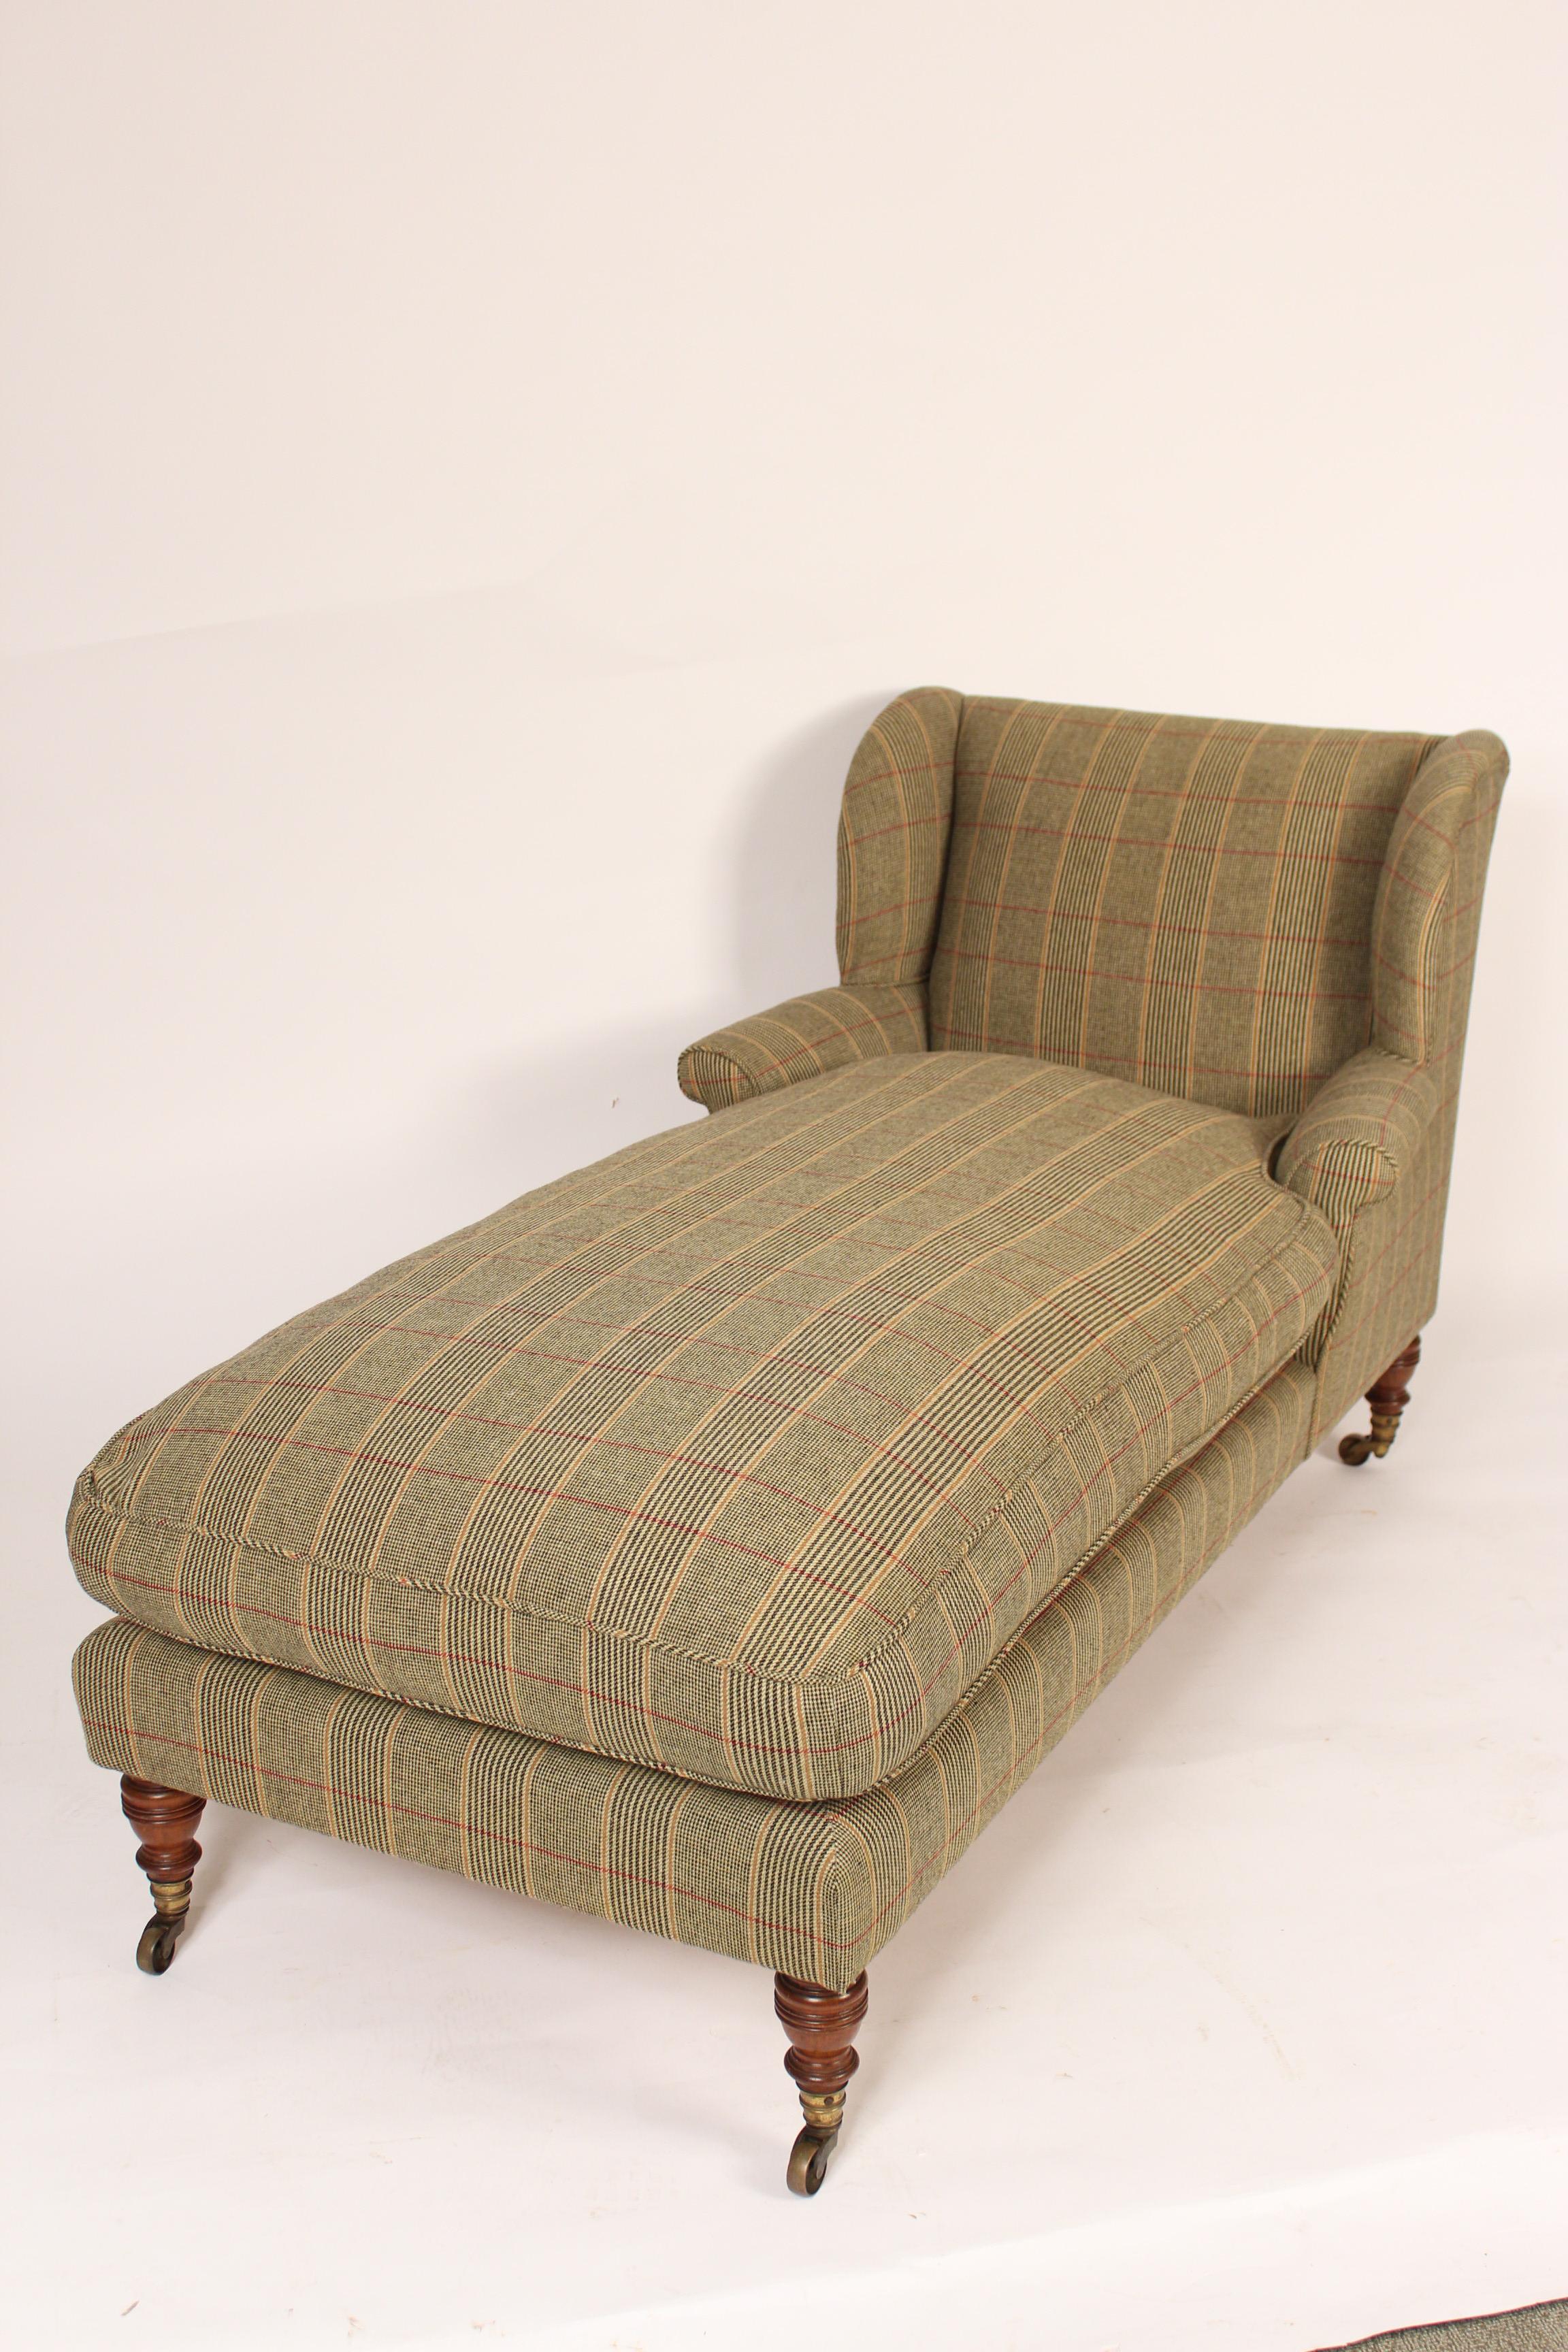 William IV Antique William iv Style Chaise Lounge by Howard & Sons